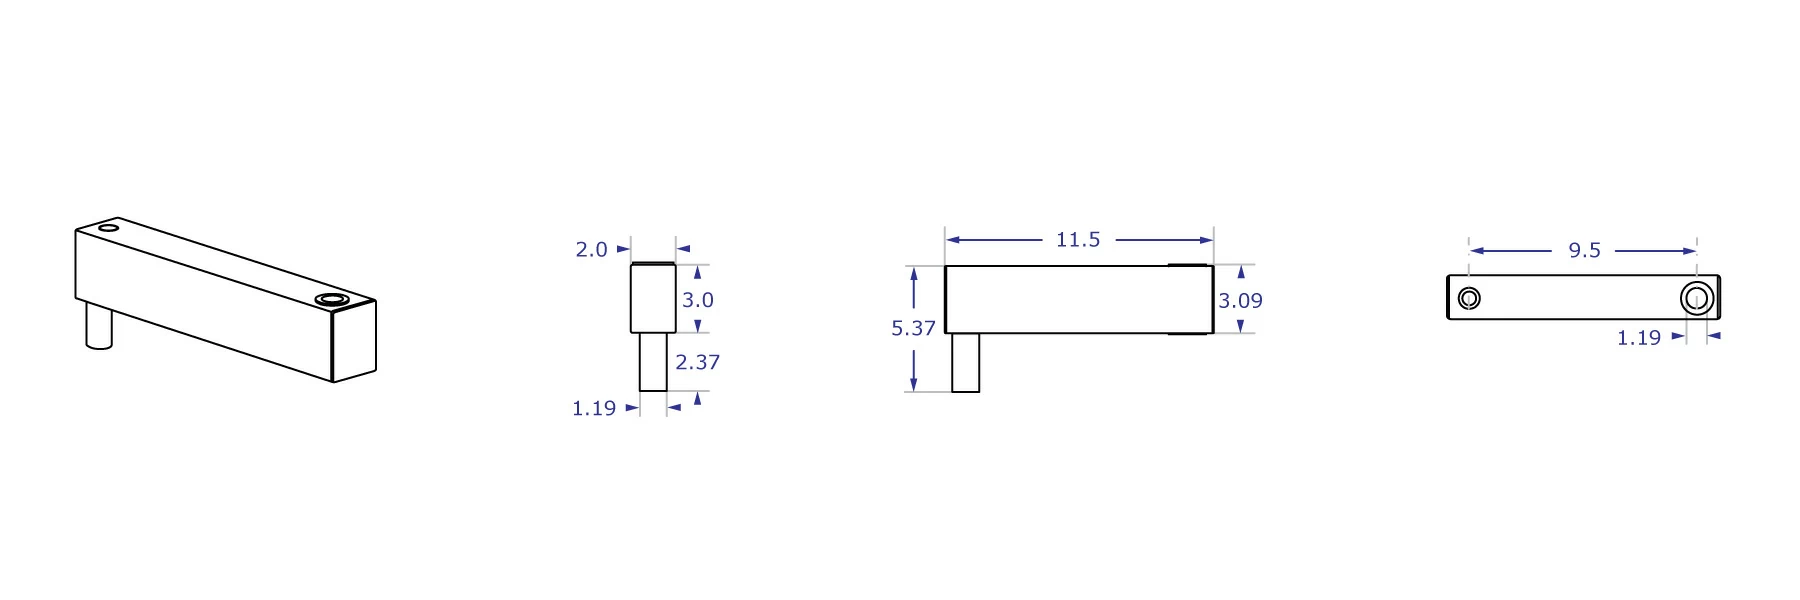 HDEXT 9.5 inch single pin heavy-duty extension specification drawings showing measurements for front, side and top views